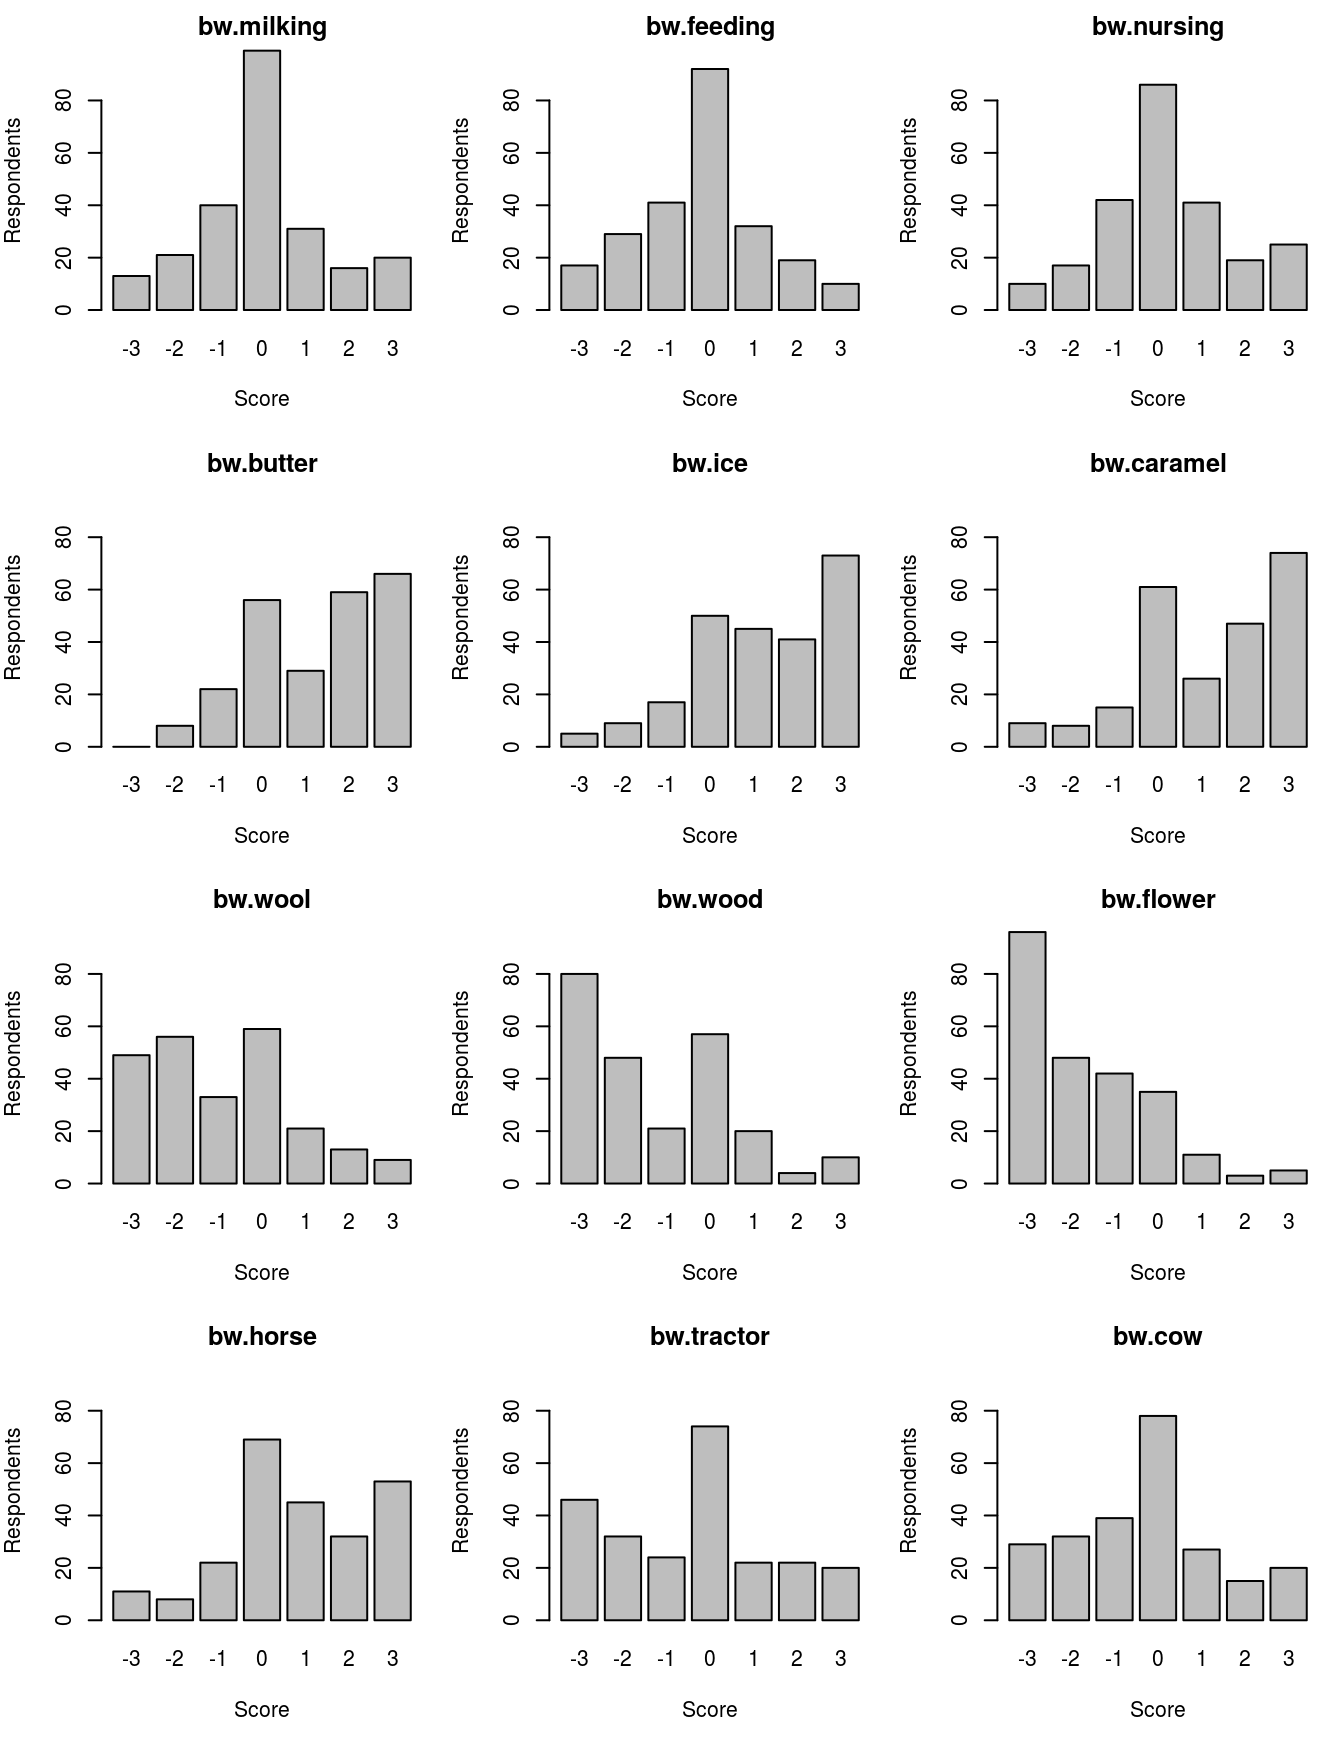 Bar plots of BW scores for 12 attribute-levels.